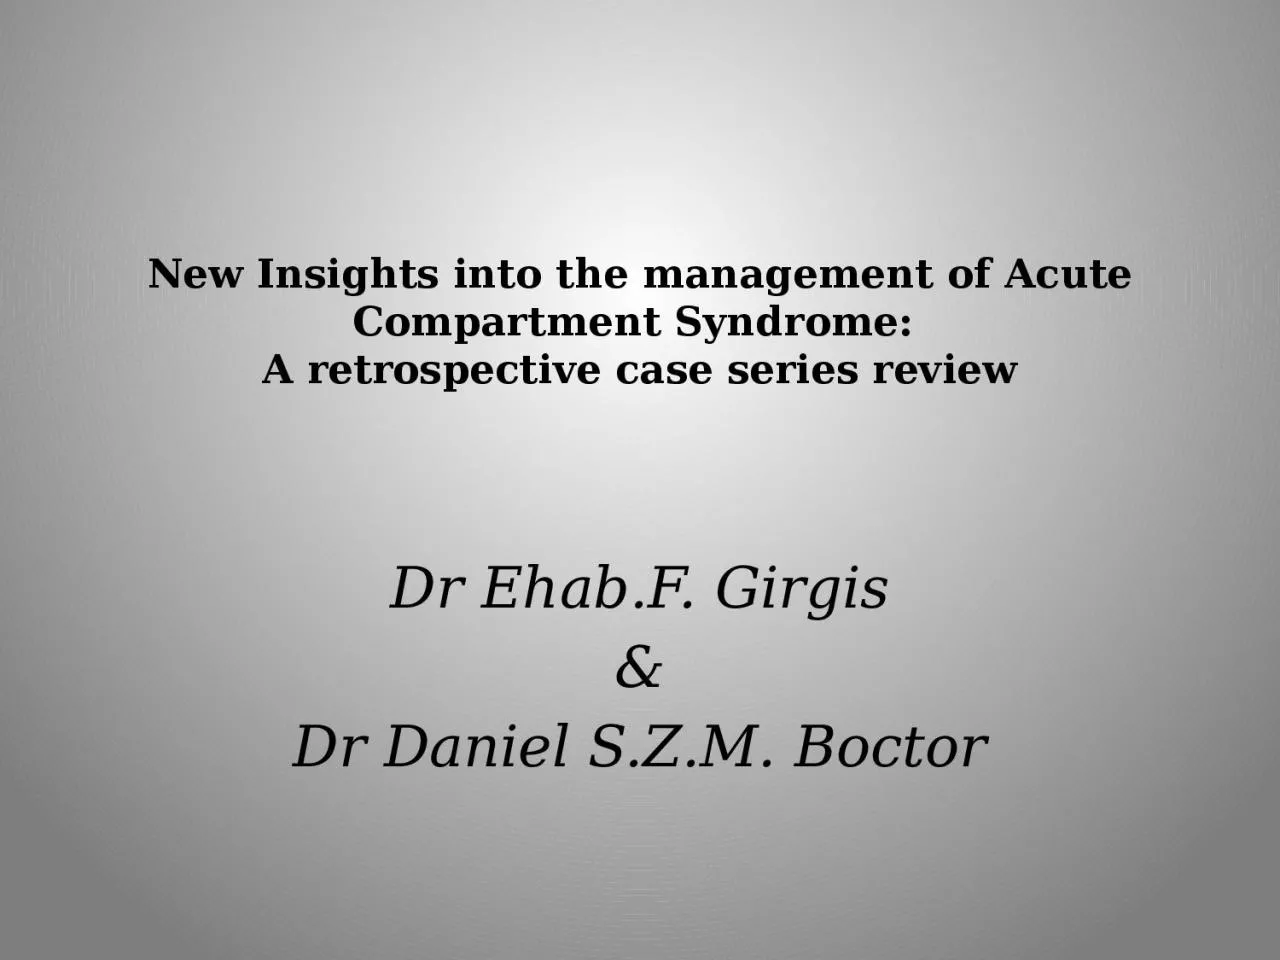 New Insights into the management of Acute Compartment Syndrome: